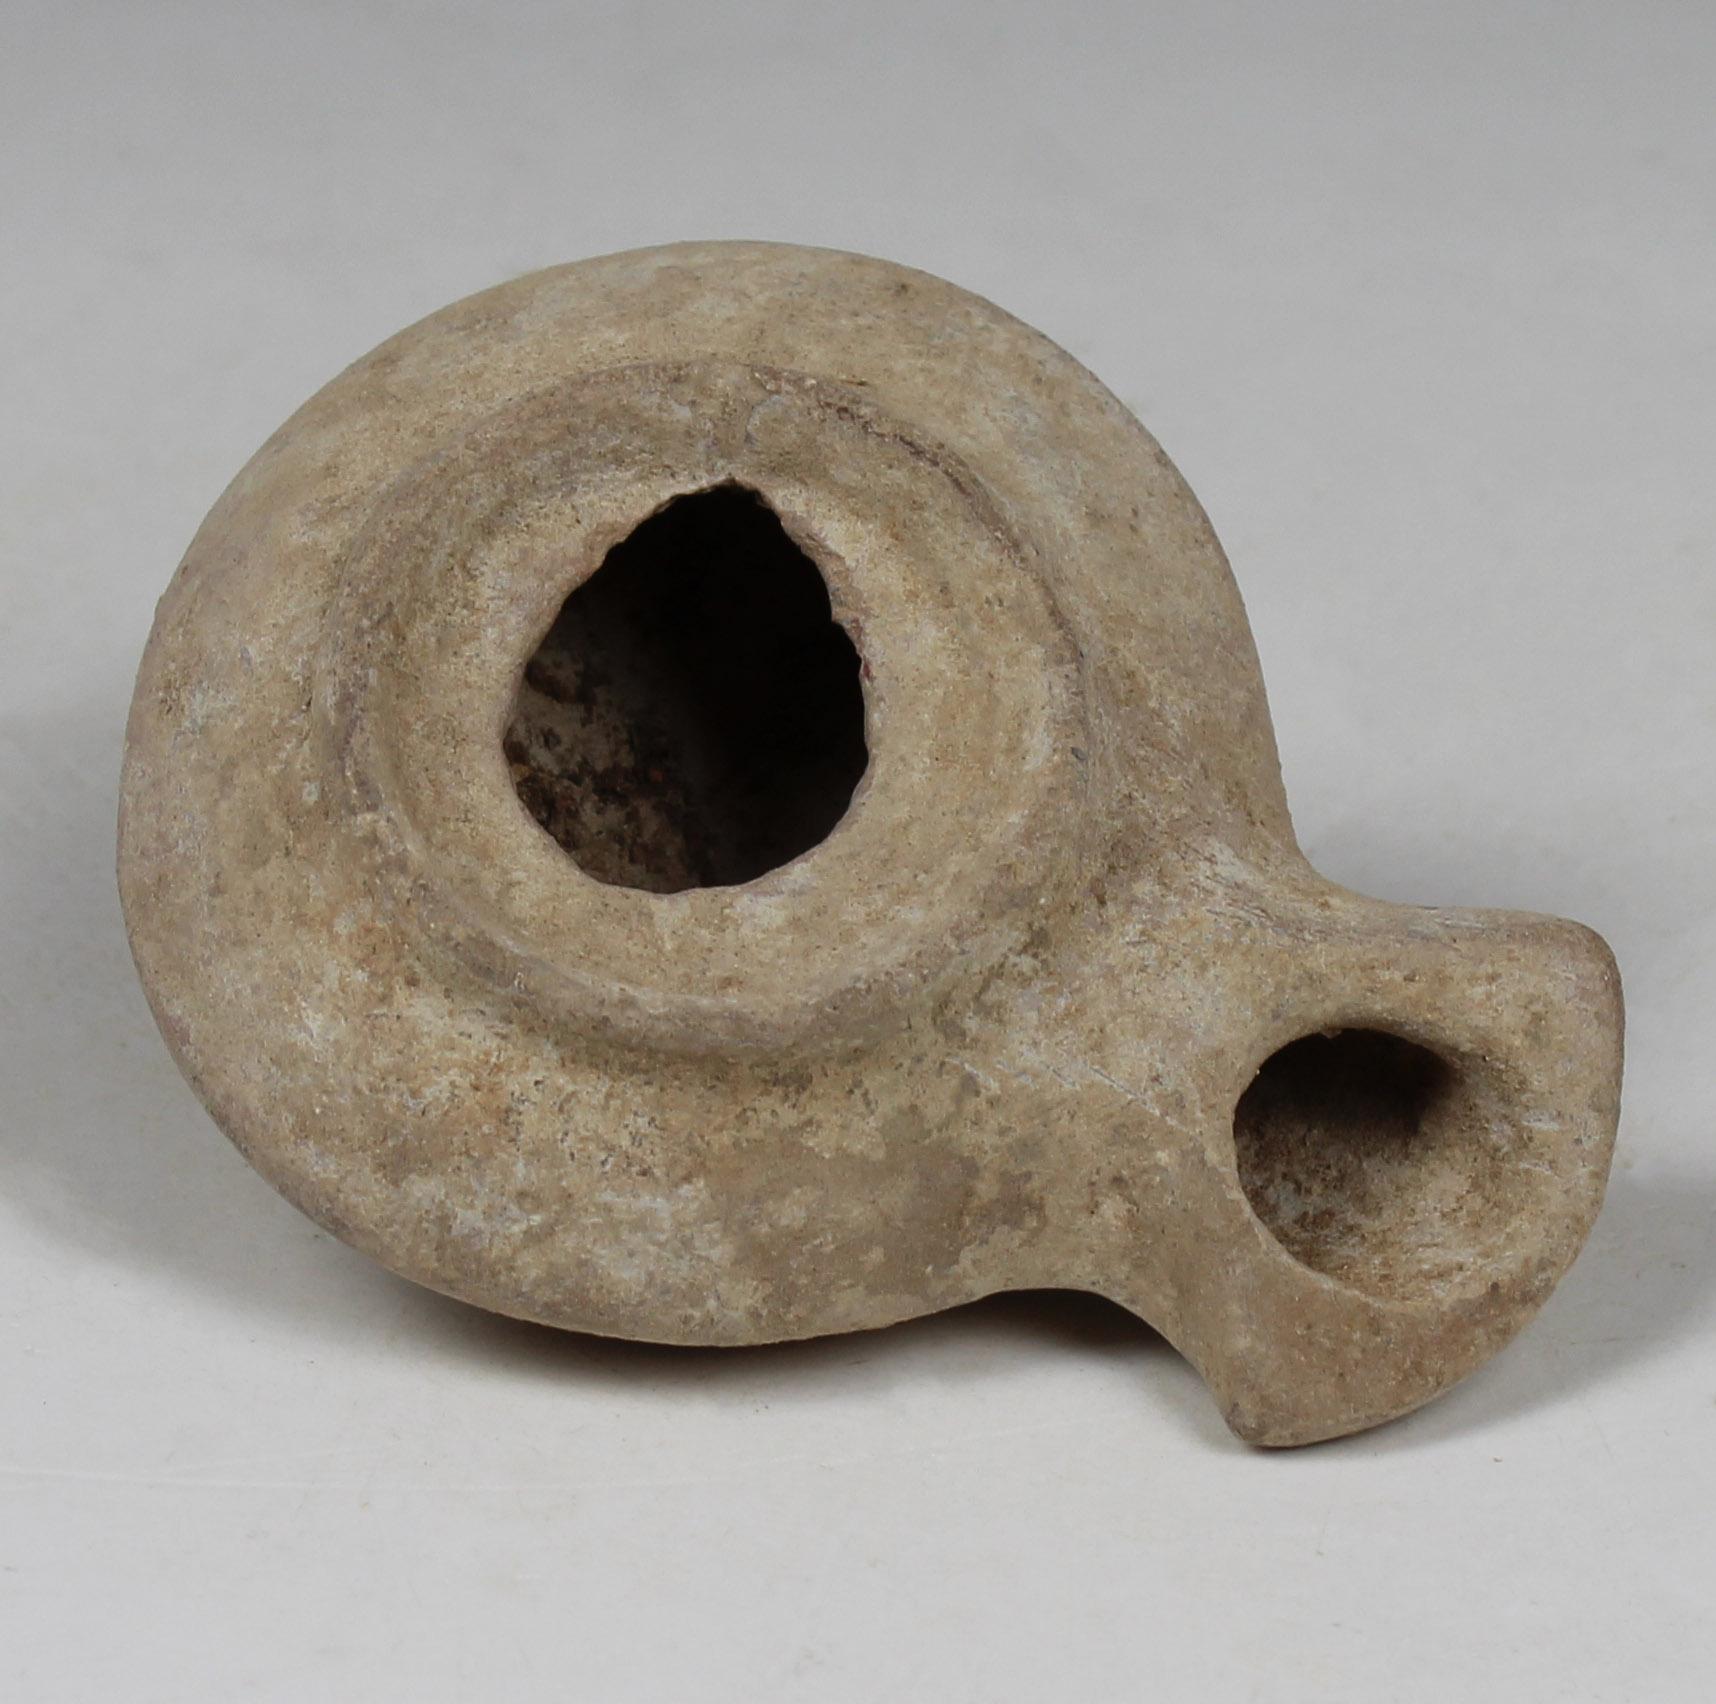 ITEM: Oil lamp, Type ‘Herodian’, Kennedy 3, Hadad 4
MATERIAL: Terracotta
CULTURE: Roman, Judaea
PERIOD: 1st Century B.C – 2nd Century A.D
DIMENSIONS: 25 mm x 62 mm x 82 mm
CONDITION: Good condition
PROVENANCE: Ex Jerusalem private collection,